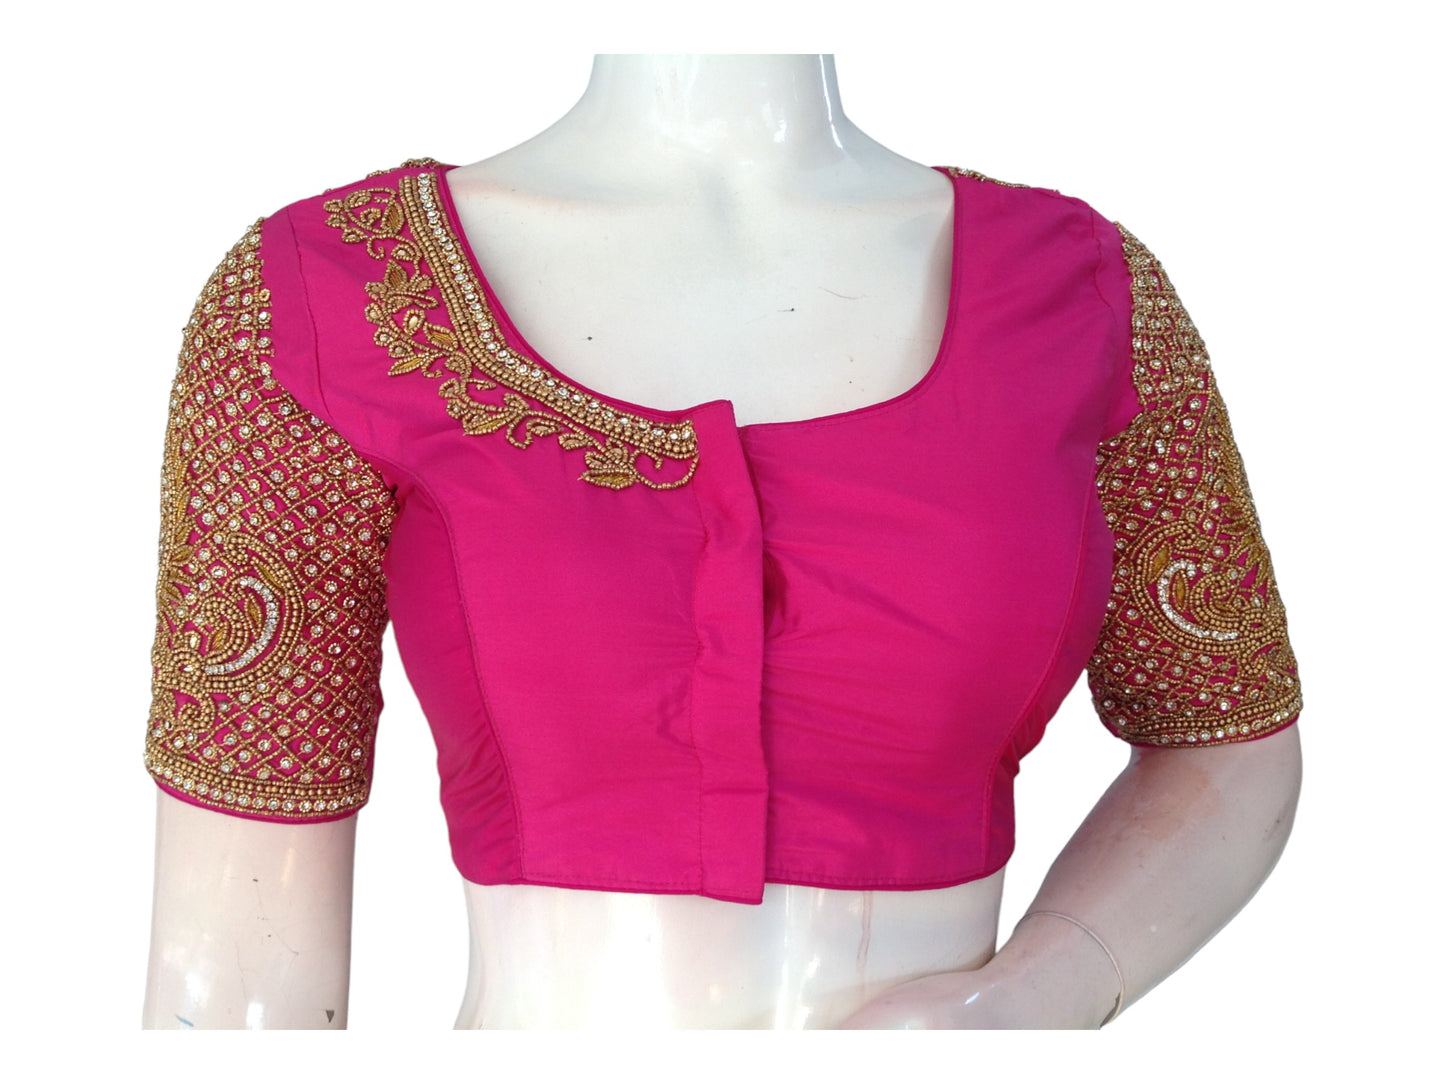 Pink Aari Saree Blouses, Hand-Embroidered Elegance from India